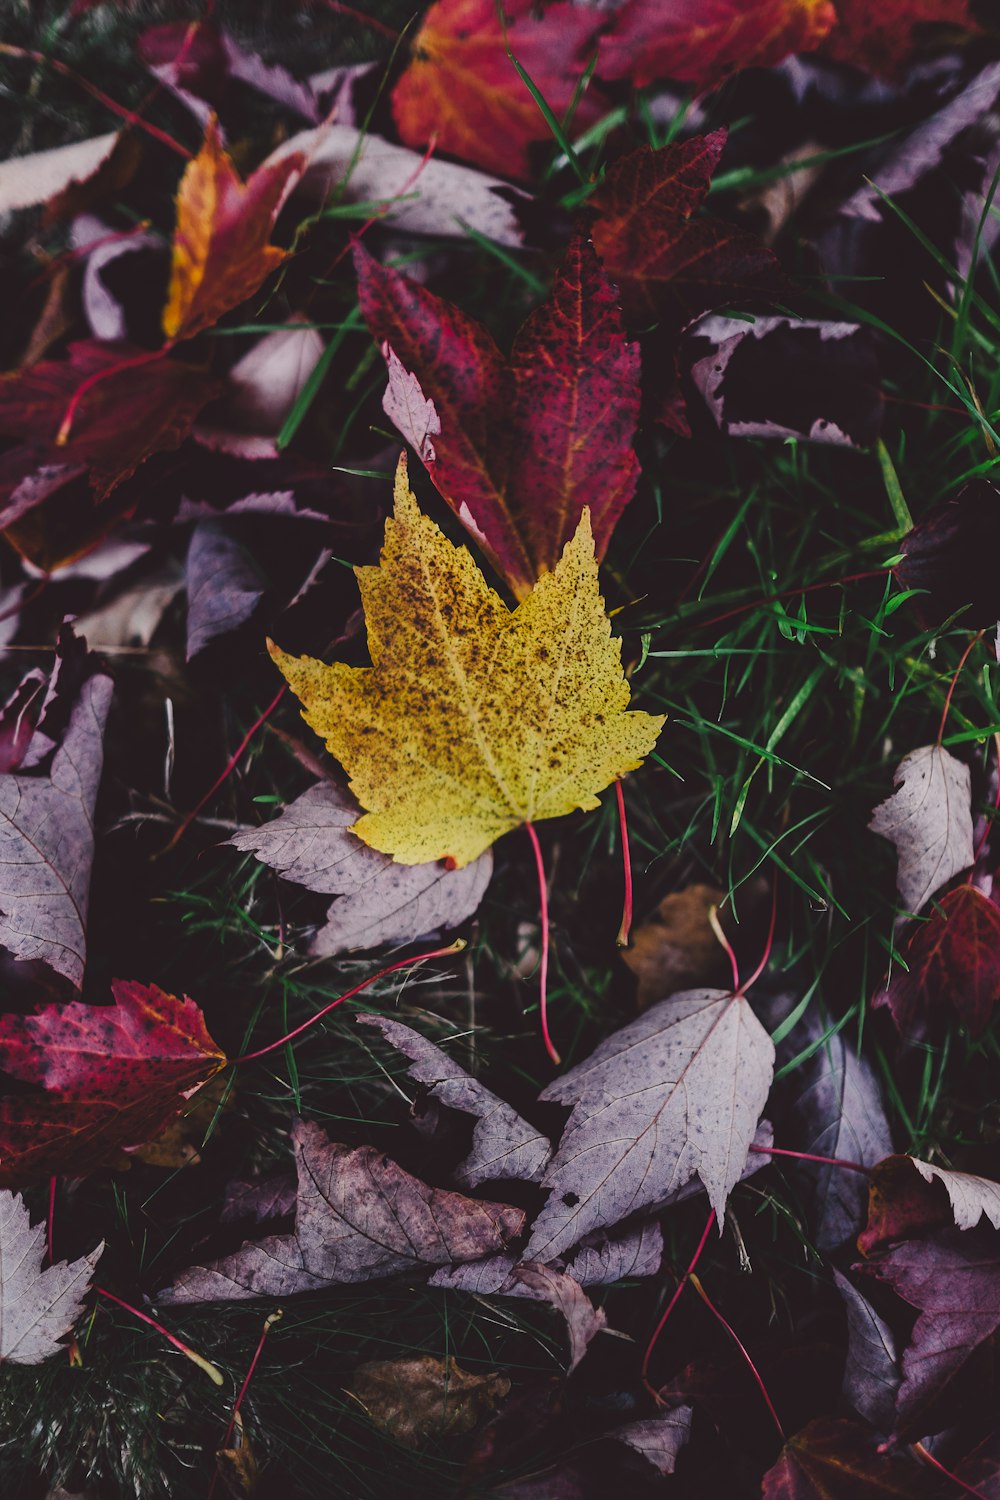 A yellow maple leaf among other red autumn leaves